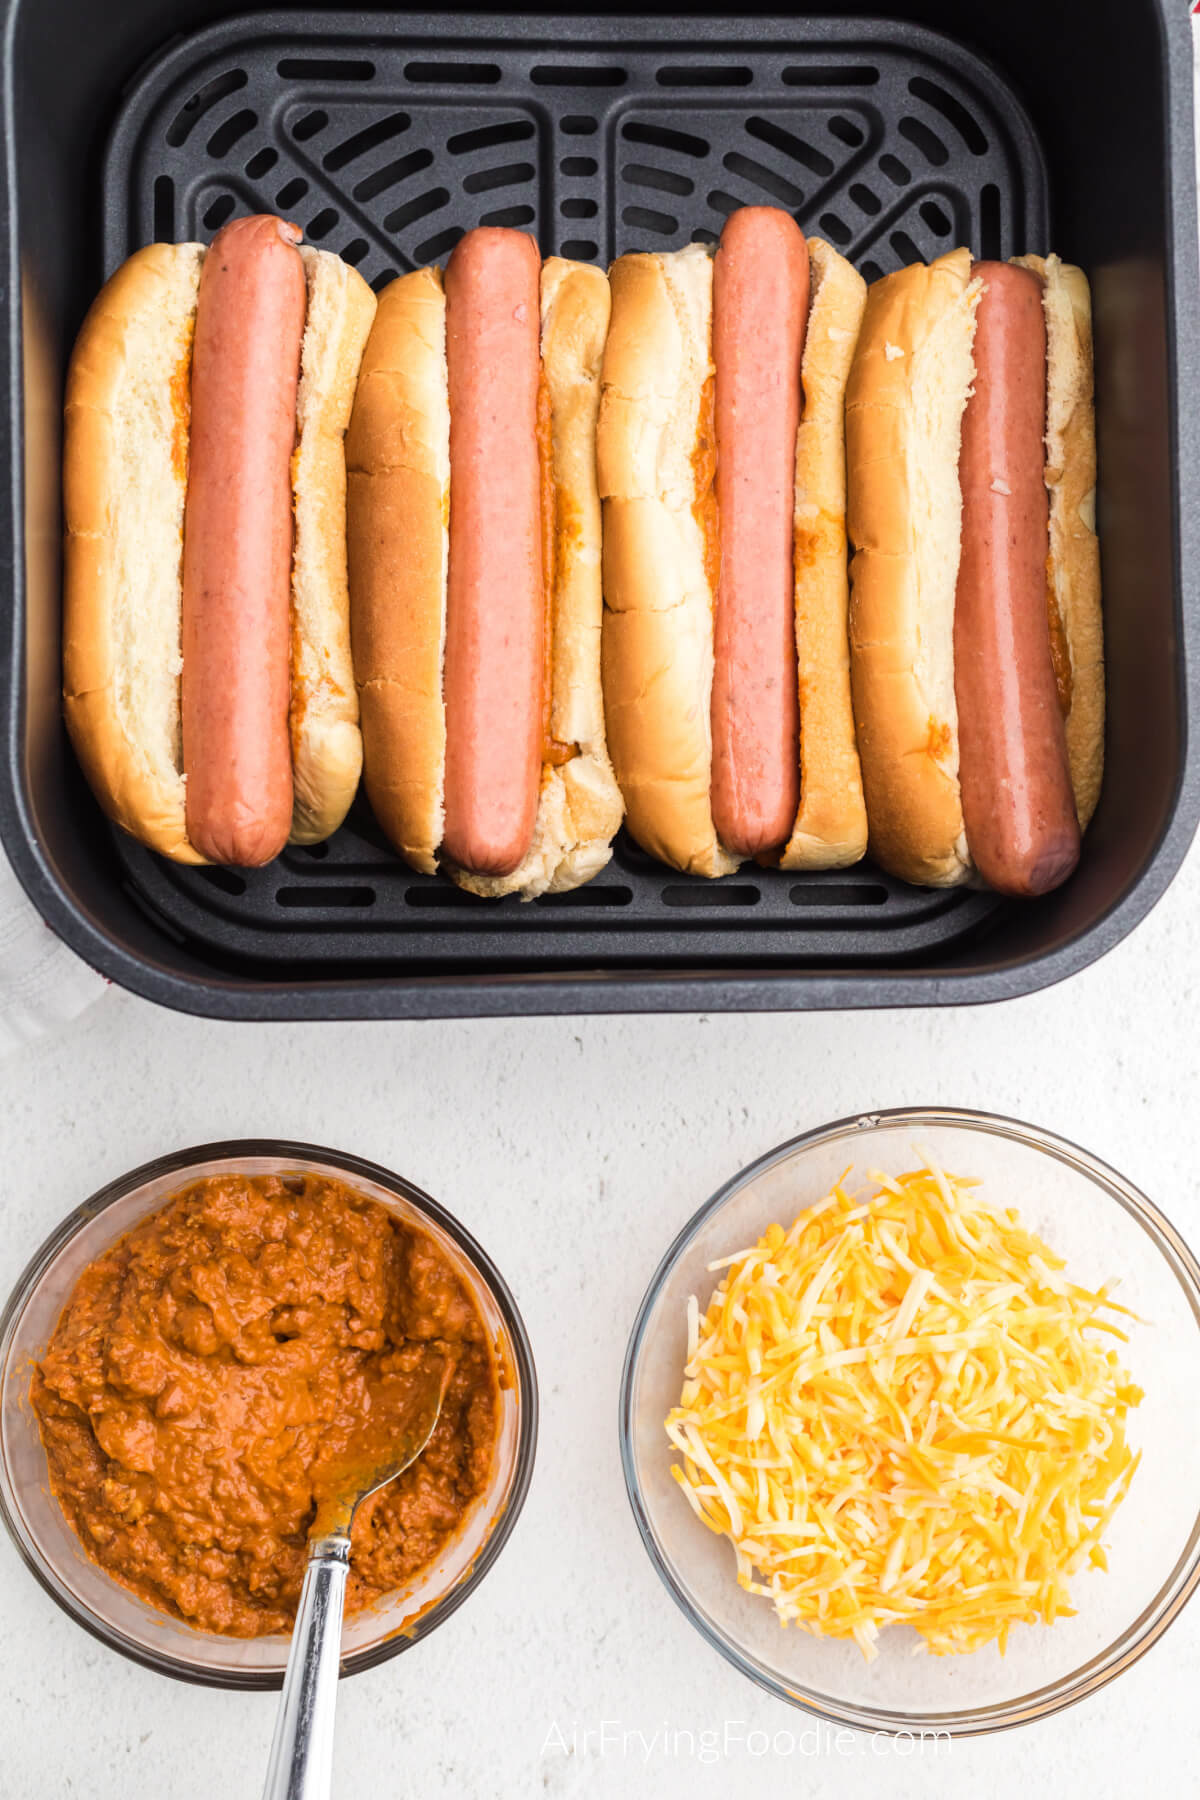 Hot dogs added to the buns with chili in the air fryer basket. 